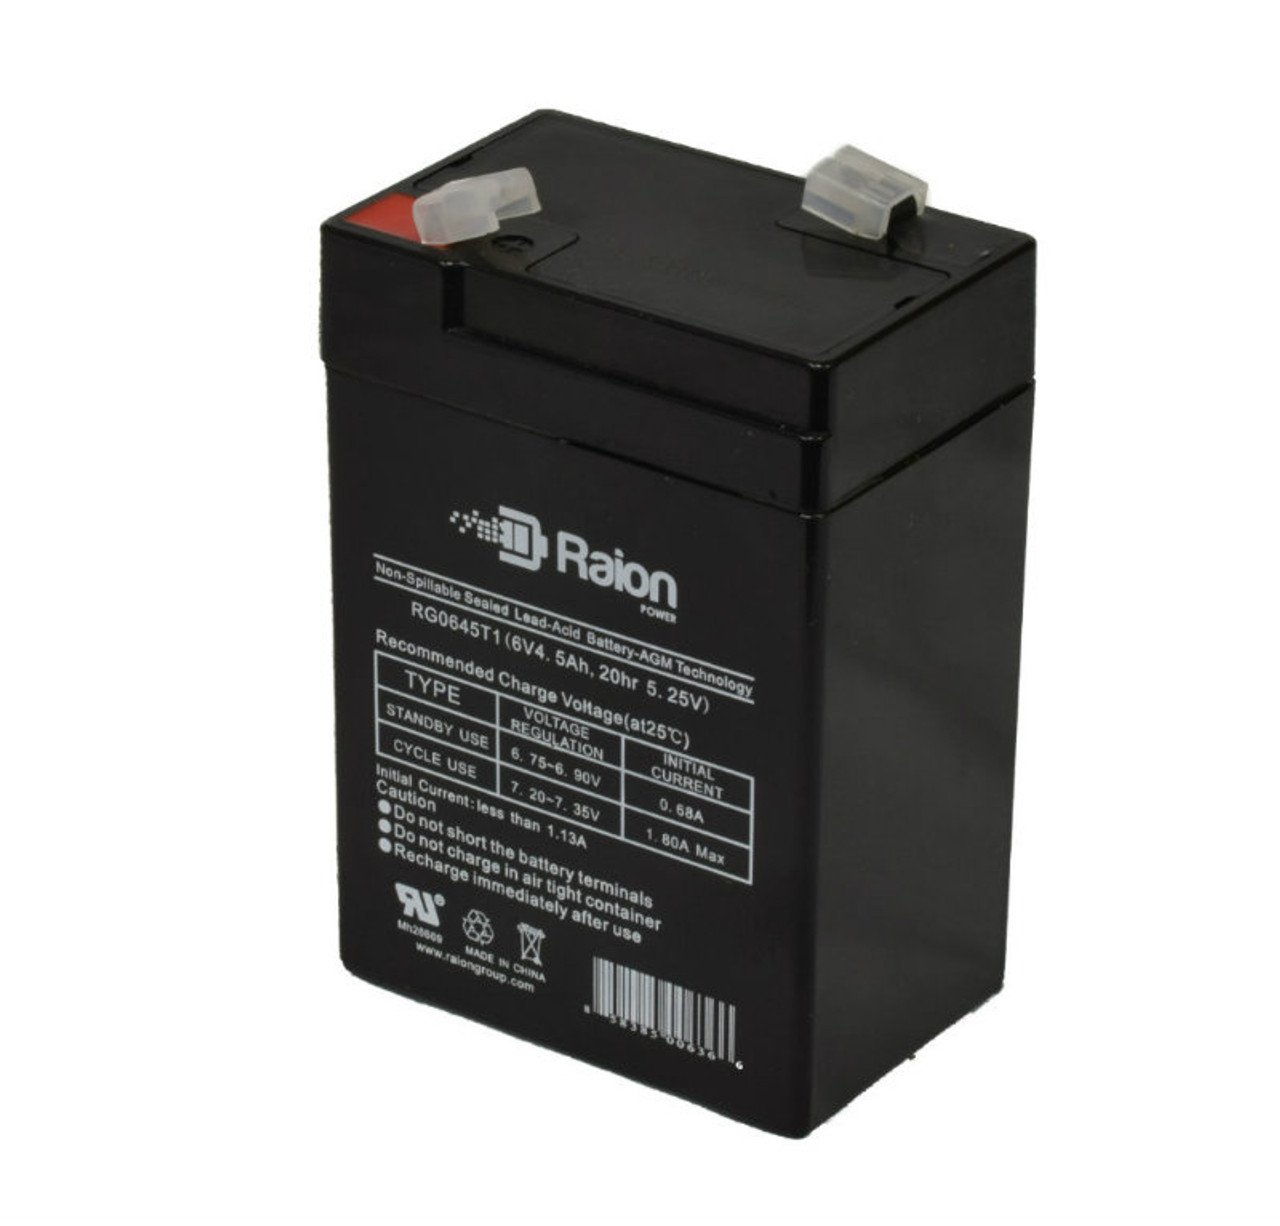 Raion Power RG0645T1 6V 4.5Ah Replacement Battery Cartridge for Teledyne LASER